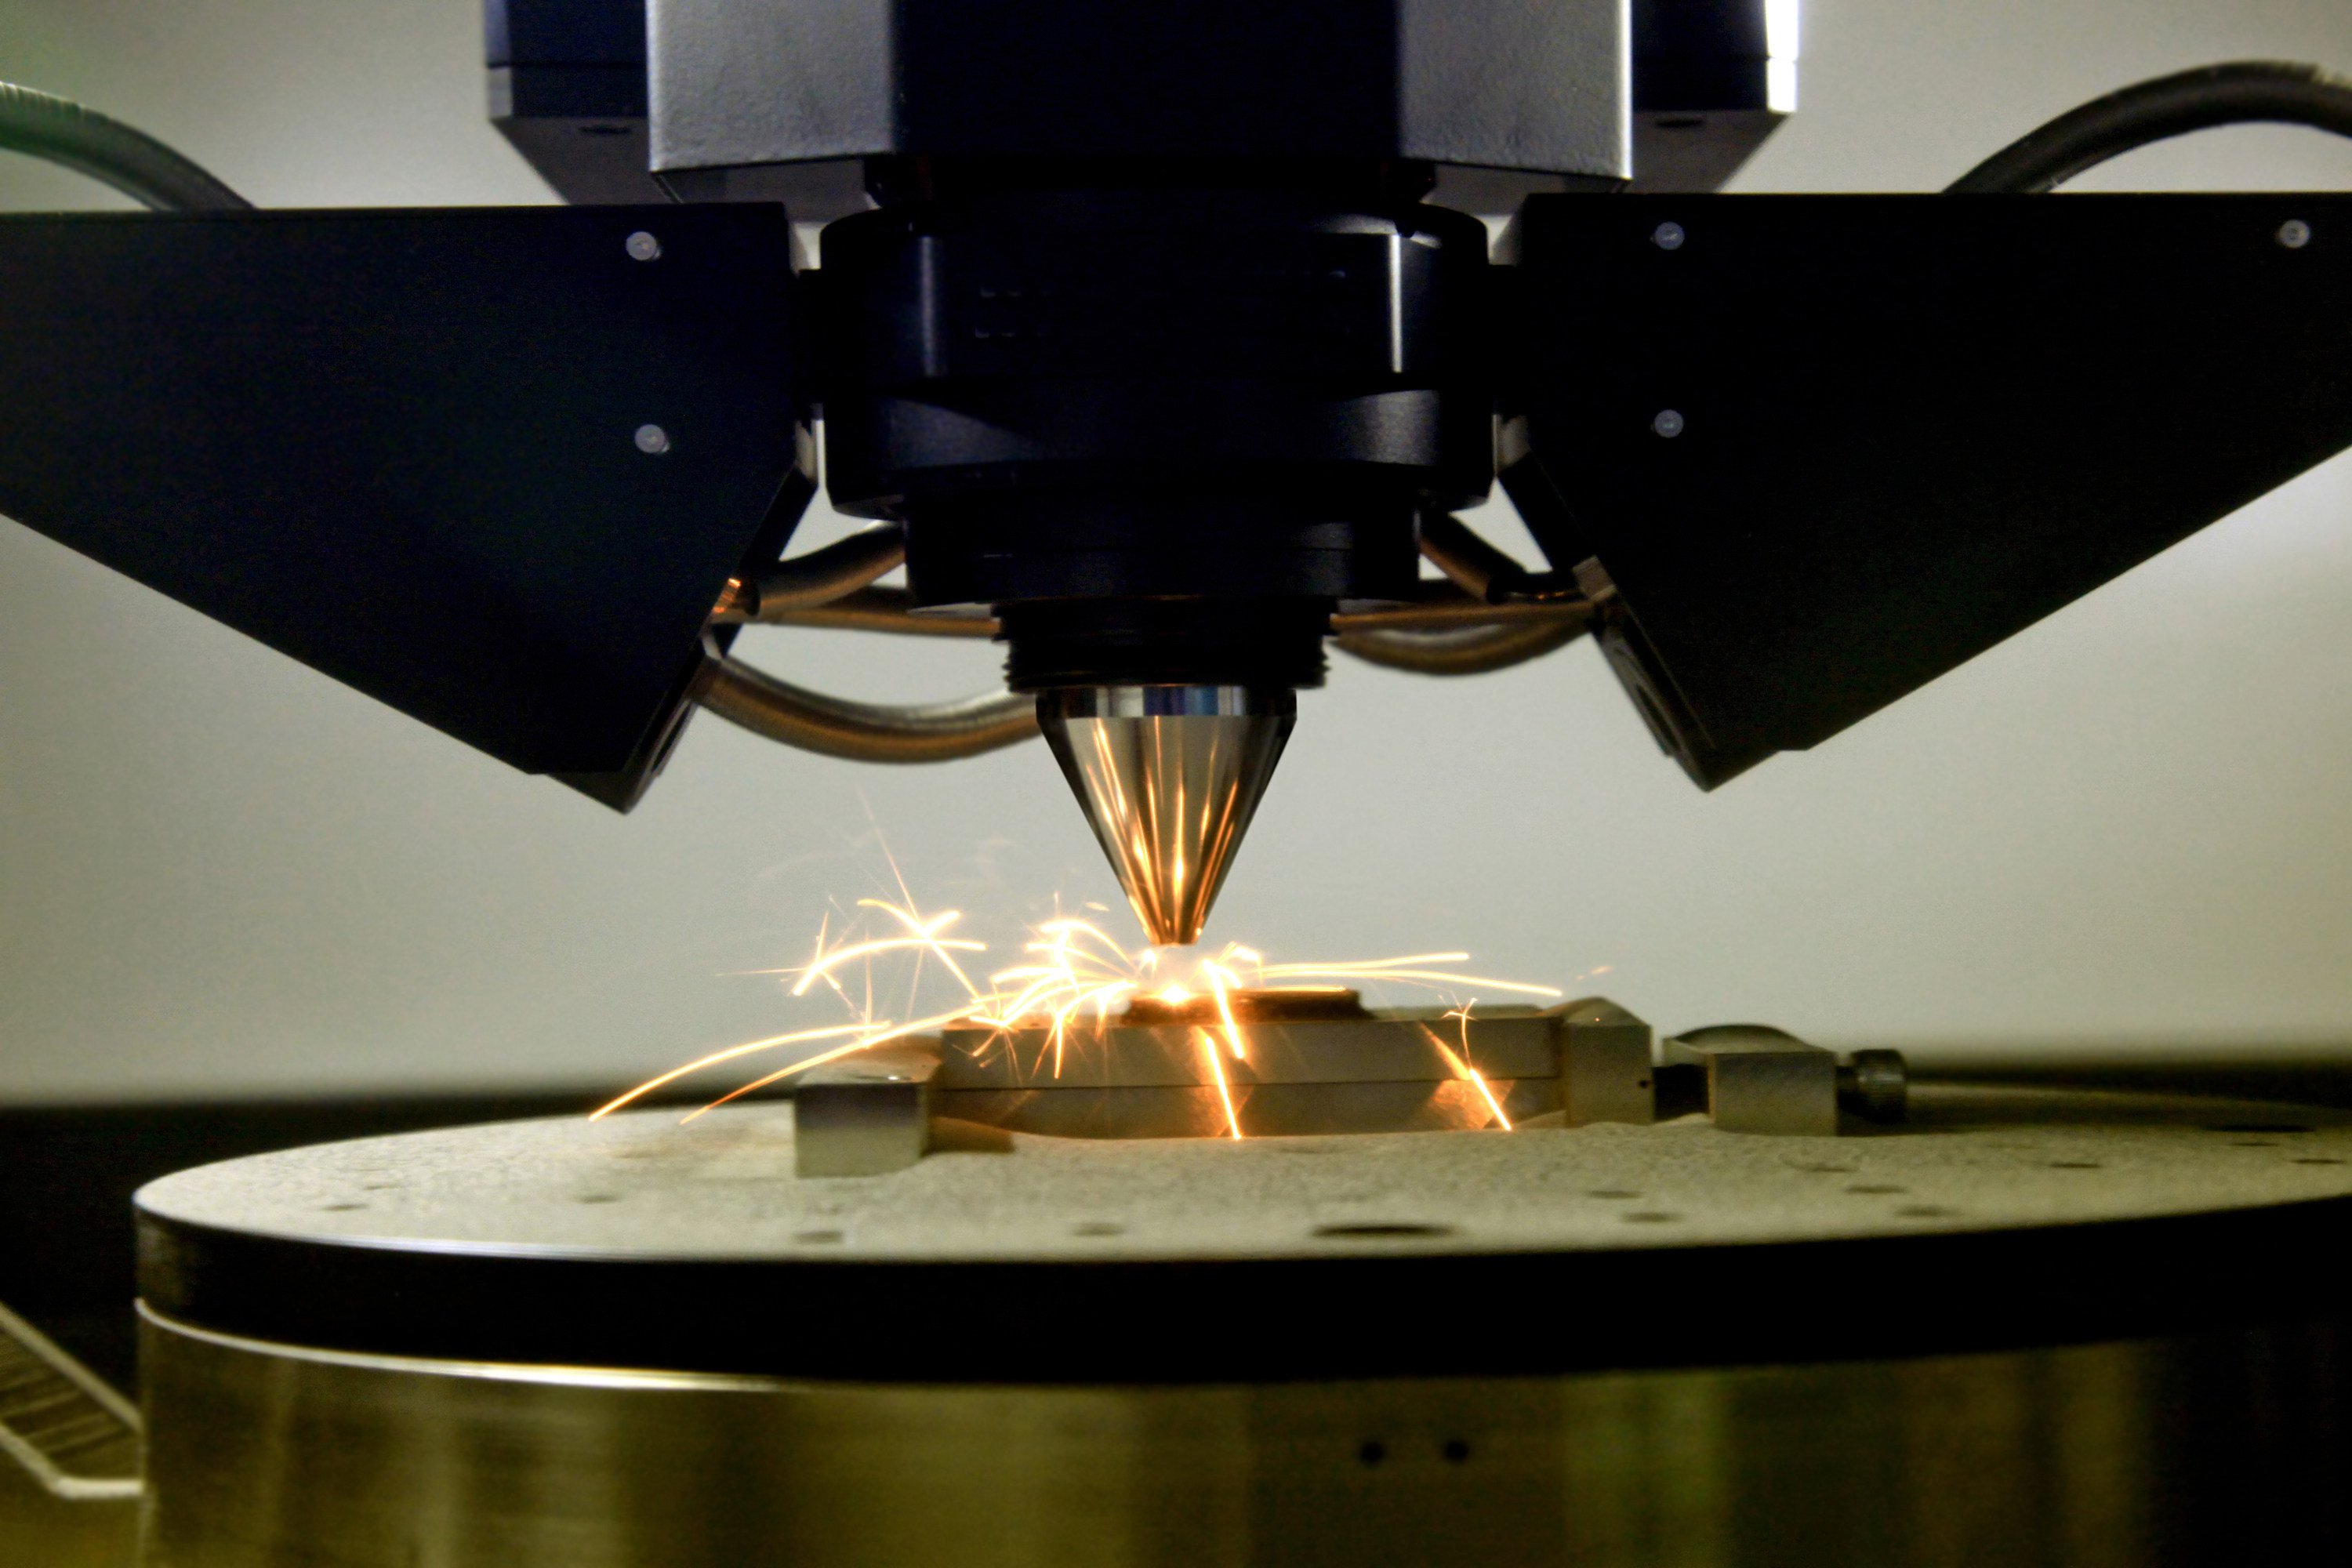 A research team from China and the US has shown that the limitations of 3d printing could be overcome to one day achieve metal components with a high level of fatigue tolerance. Photo: Shutterstock